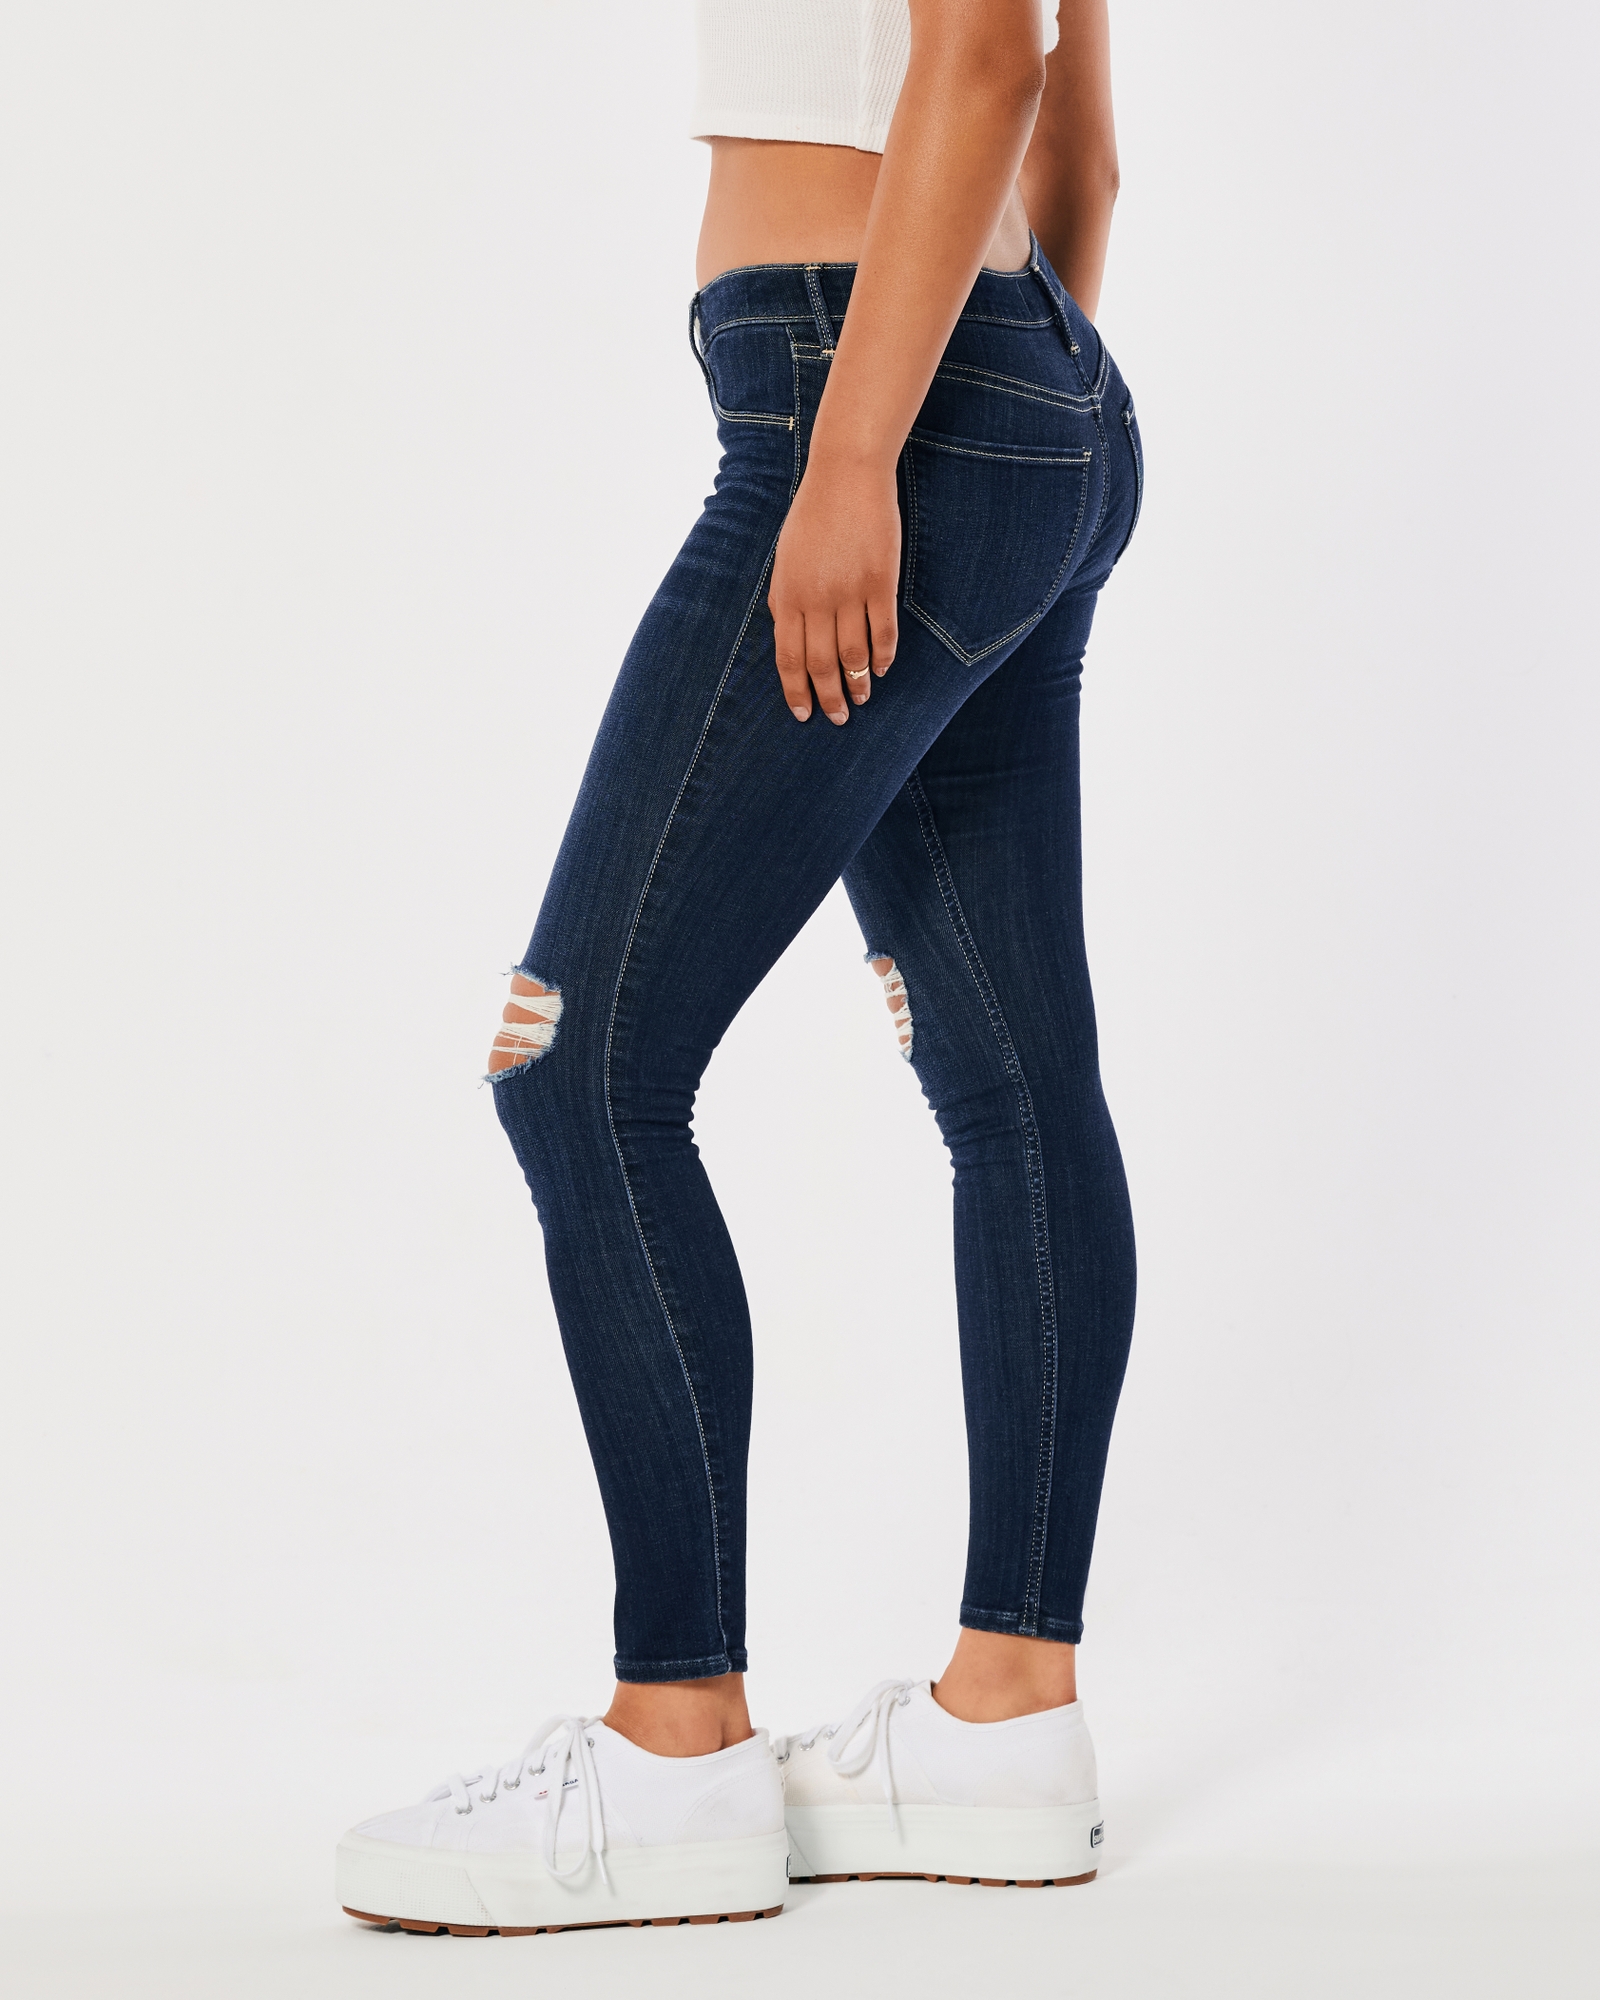 Hollister low rise jean leggings with advanced